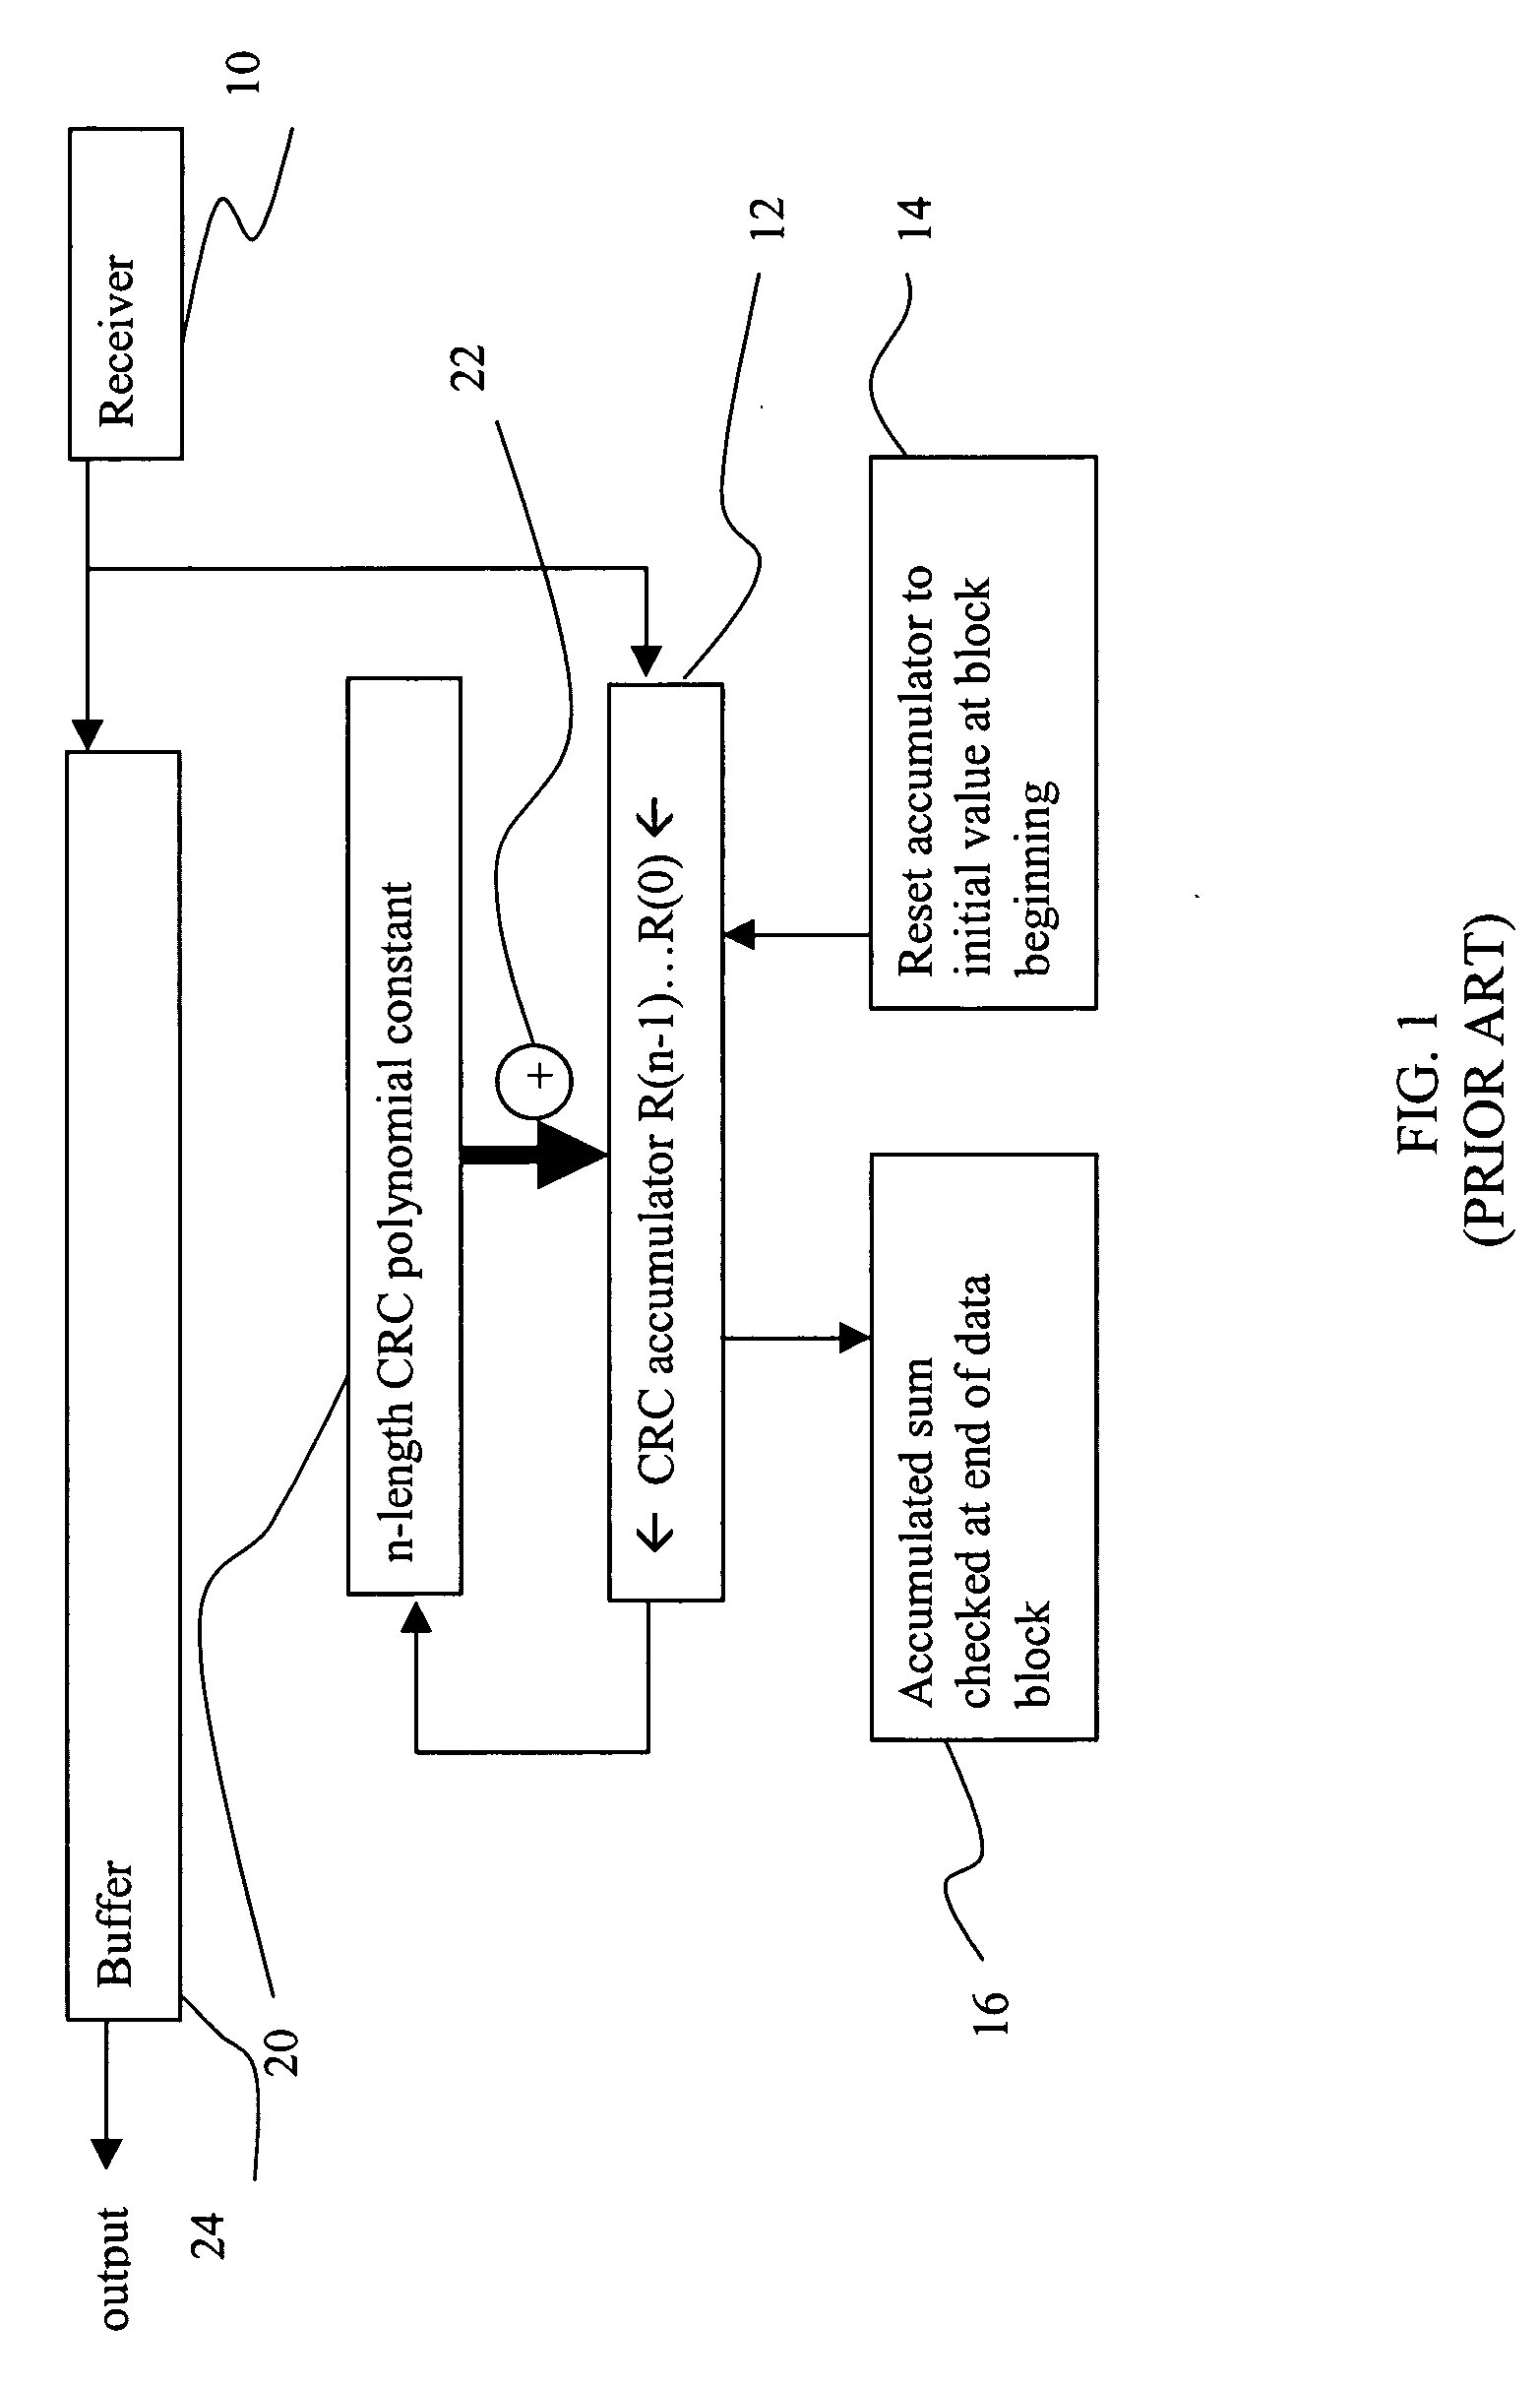 Two input differential cyclic accumulator